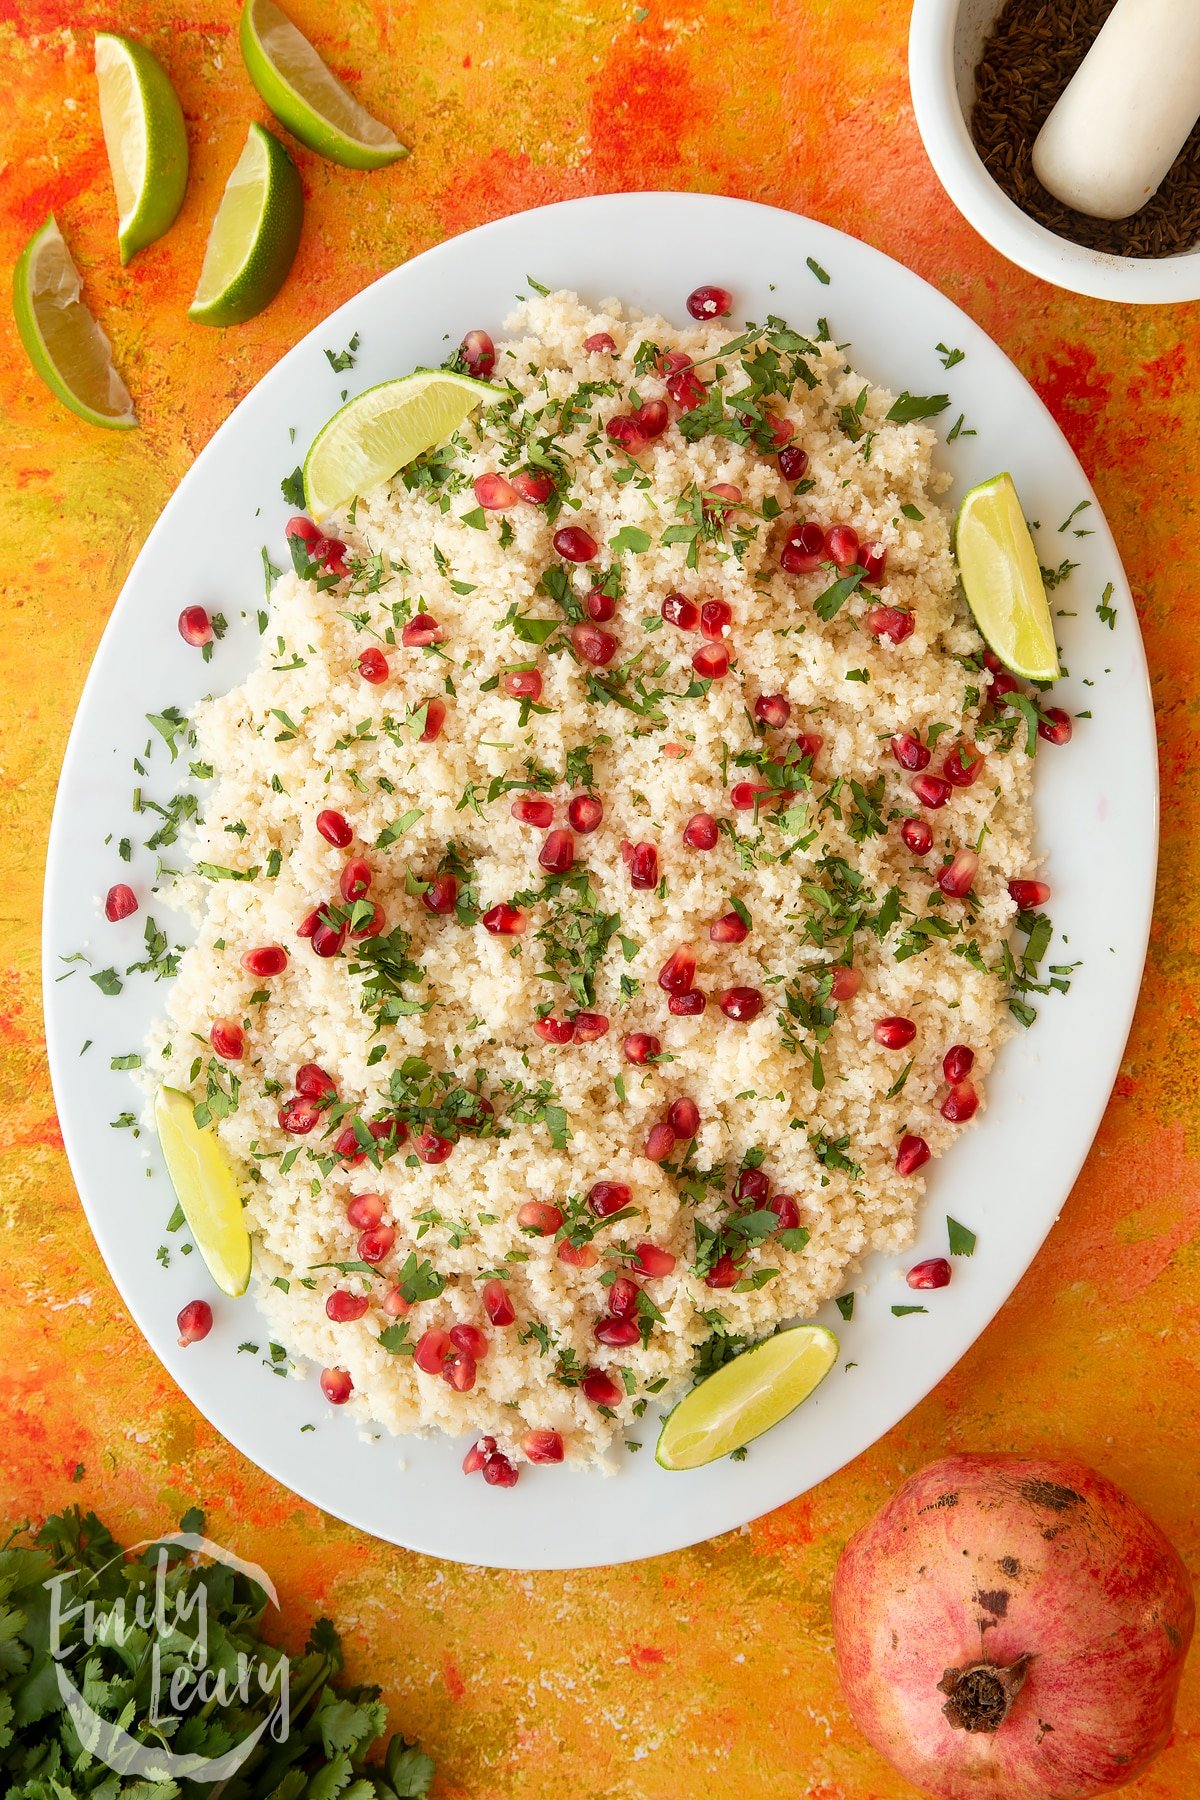 Finished plate of cauliflower couscous with pomegranate.